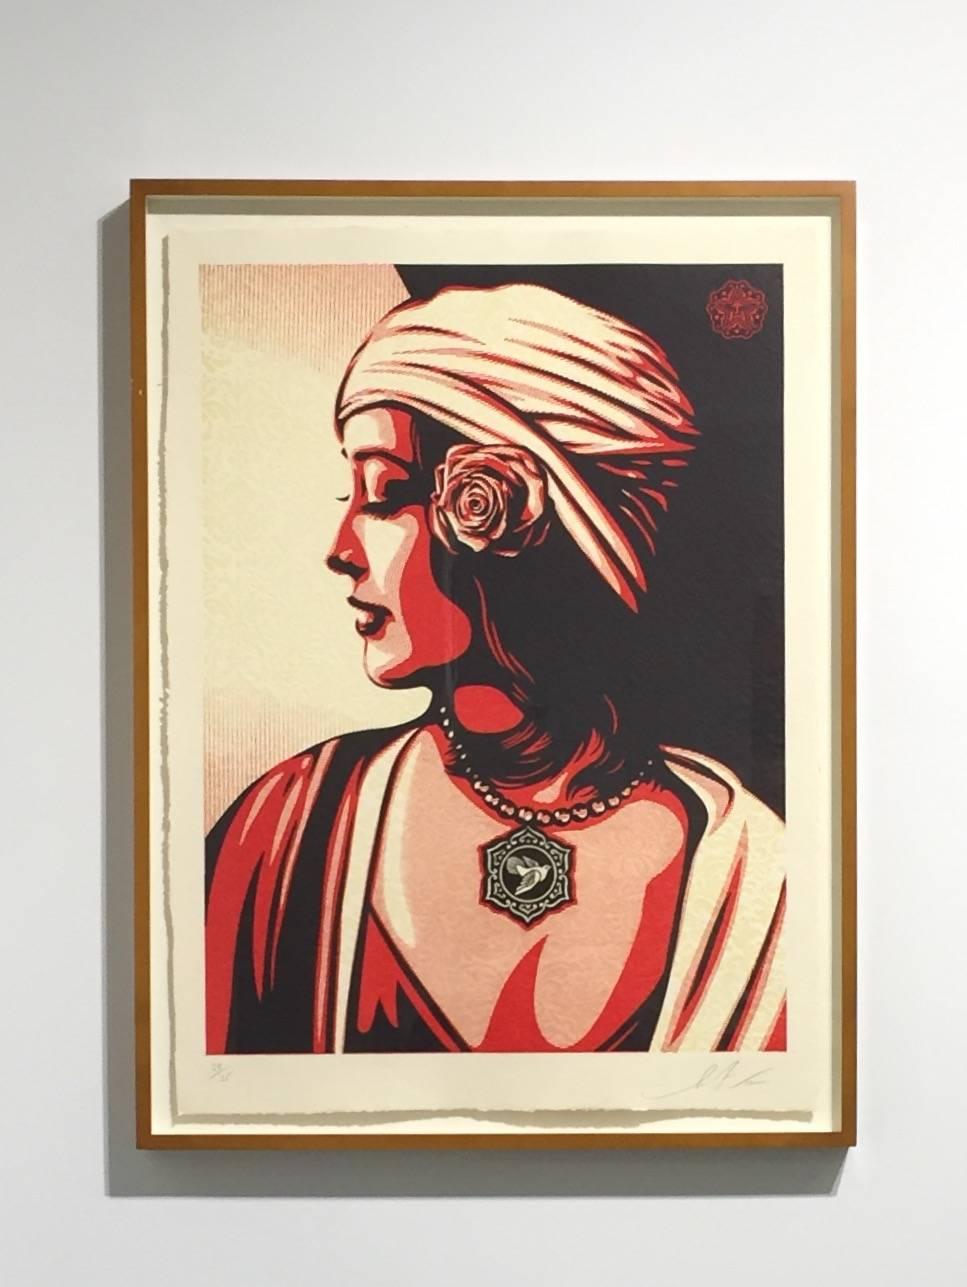 Obey Harmony Relief - Print by Shepard Fairey